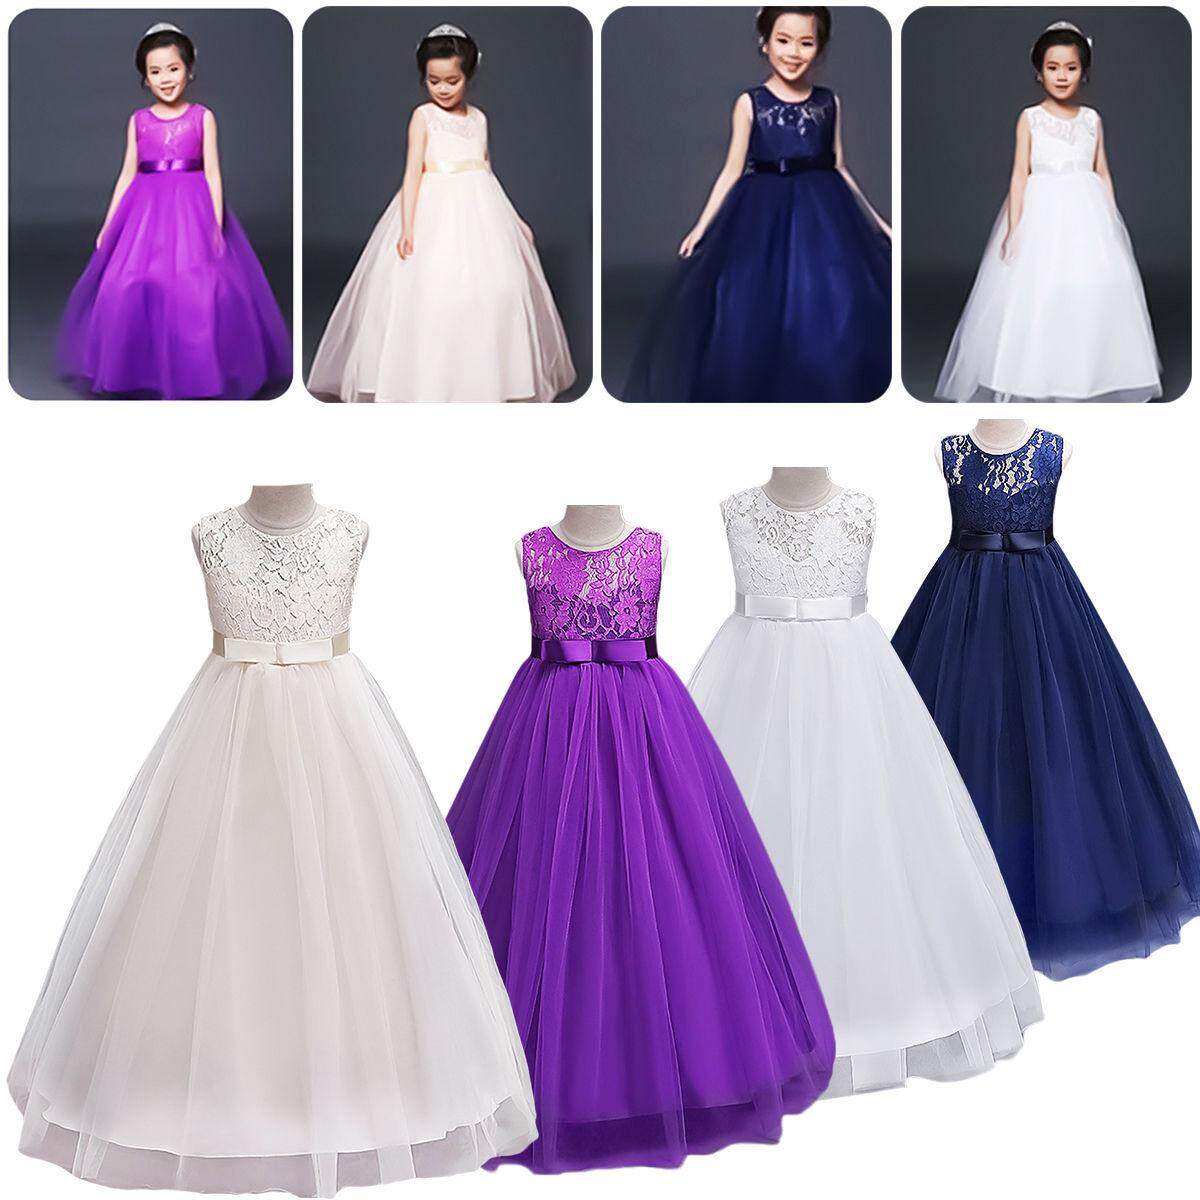 Flower Girls Chiffon Lace Wedding Bridesmaid Pageant Party Formal Dress 3-11T